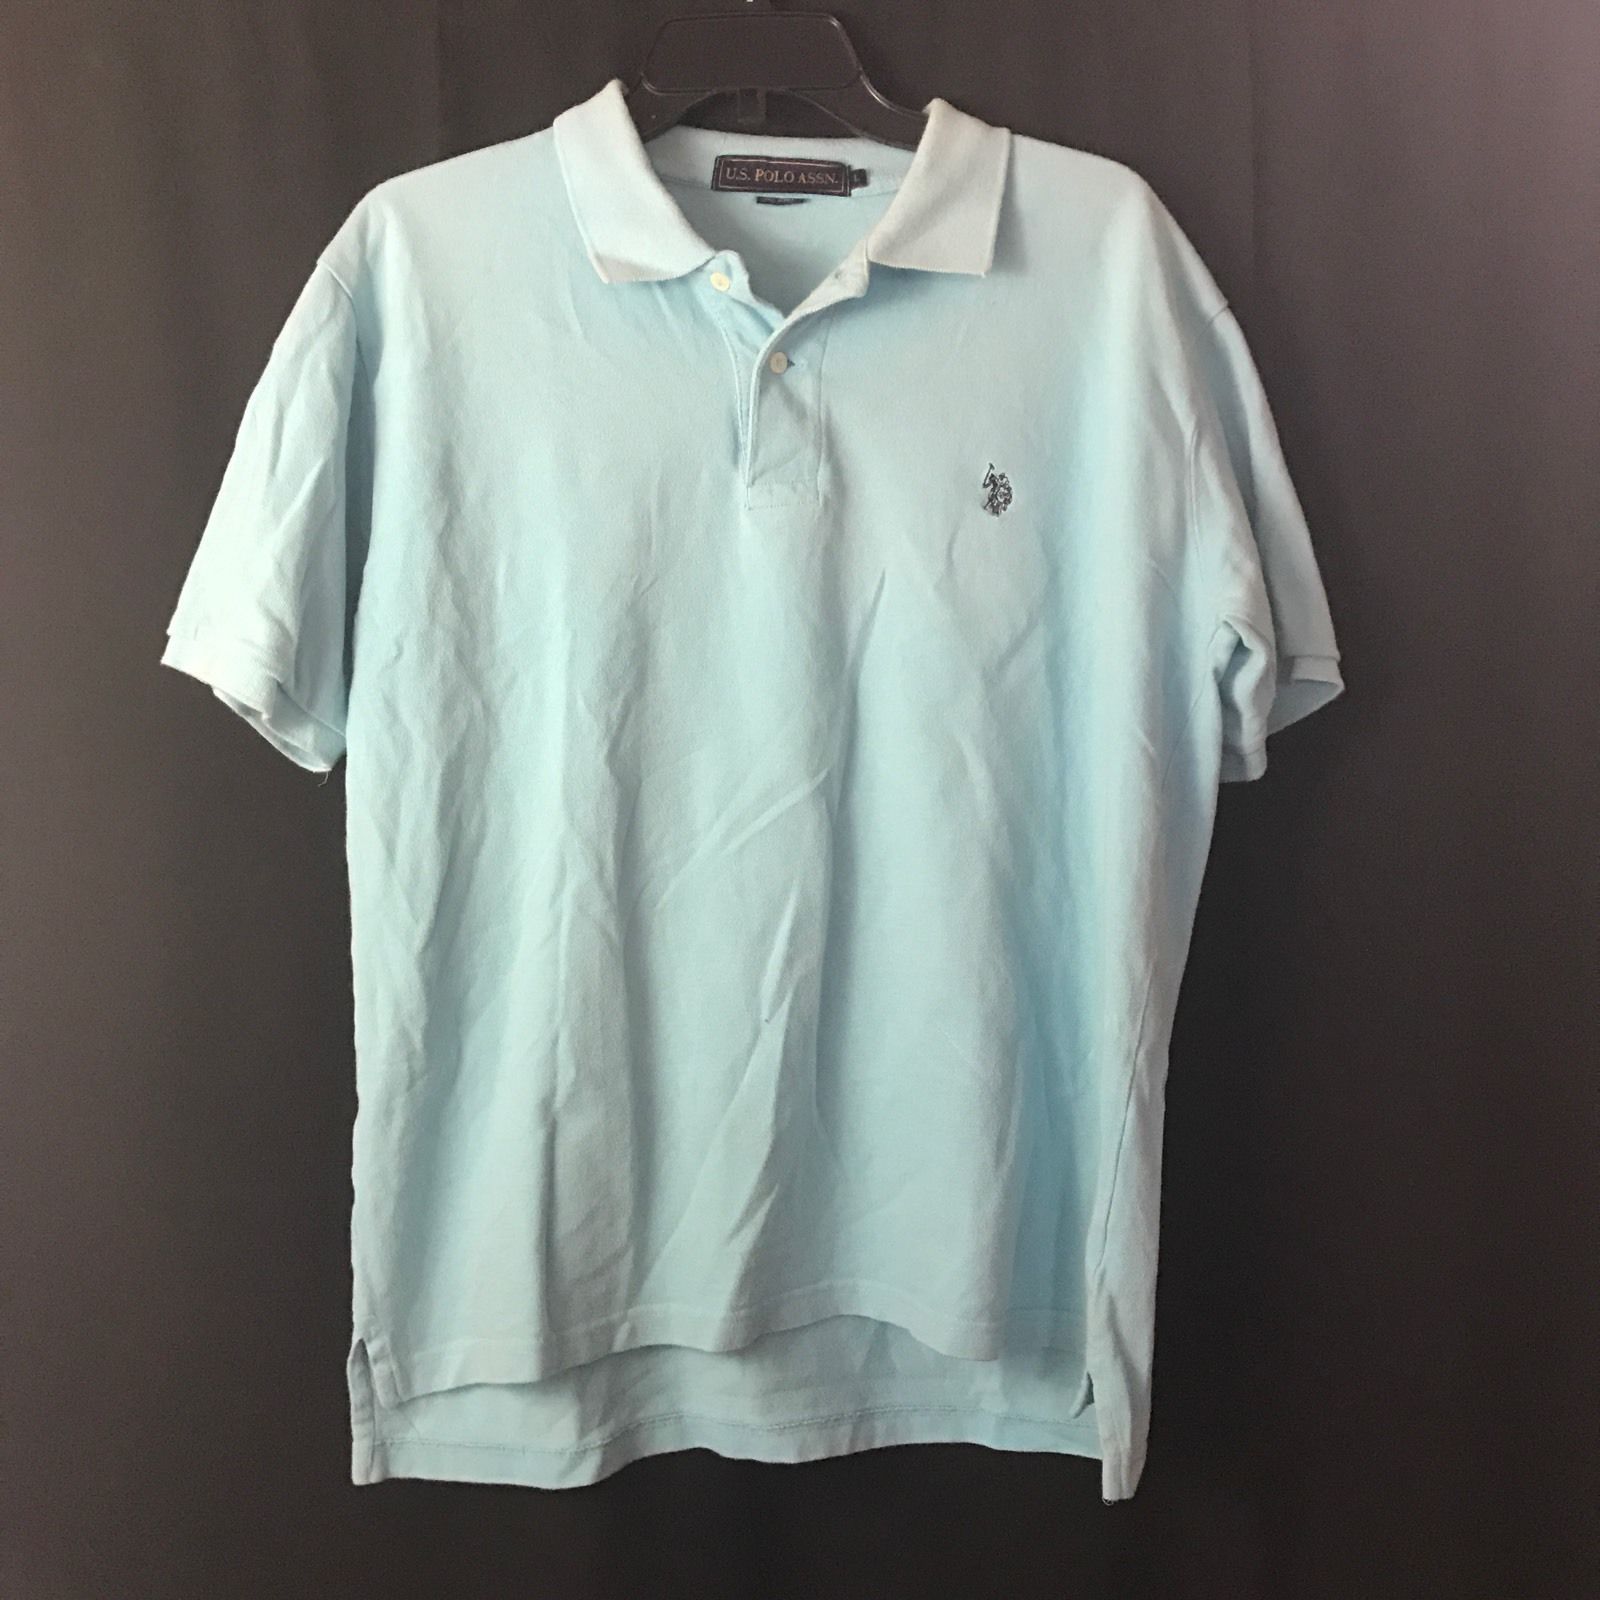 Primary image for Mens USPA US Polo ASSN Shirt Short Sleeve Large Light Blue